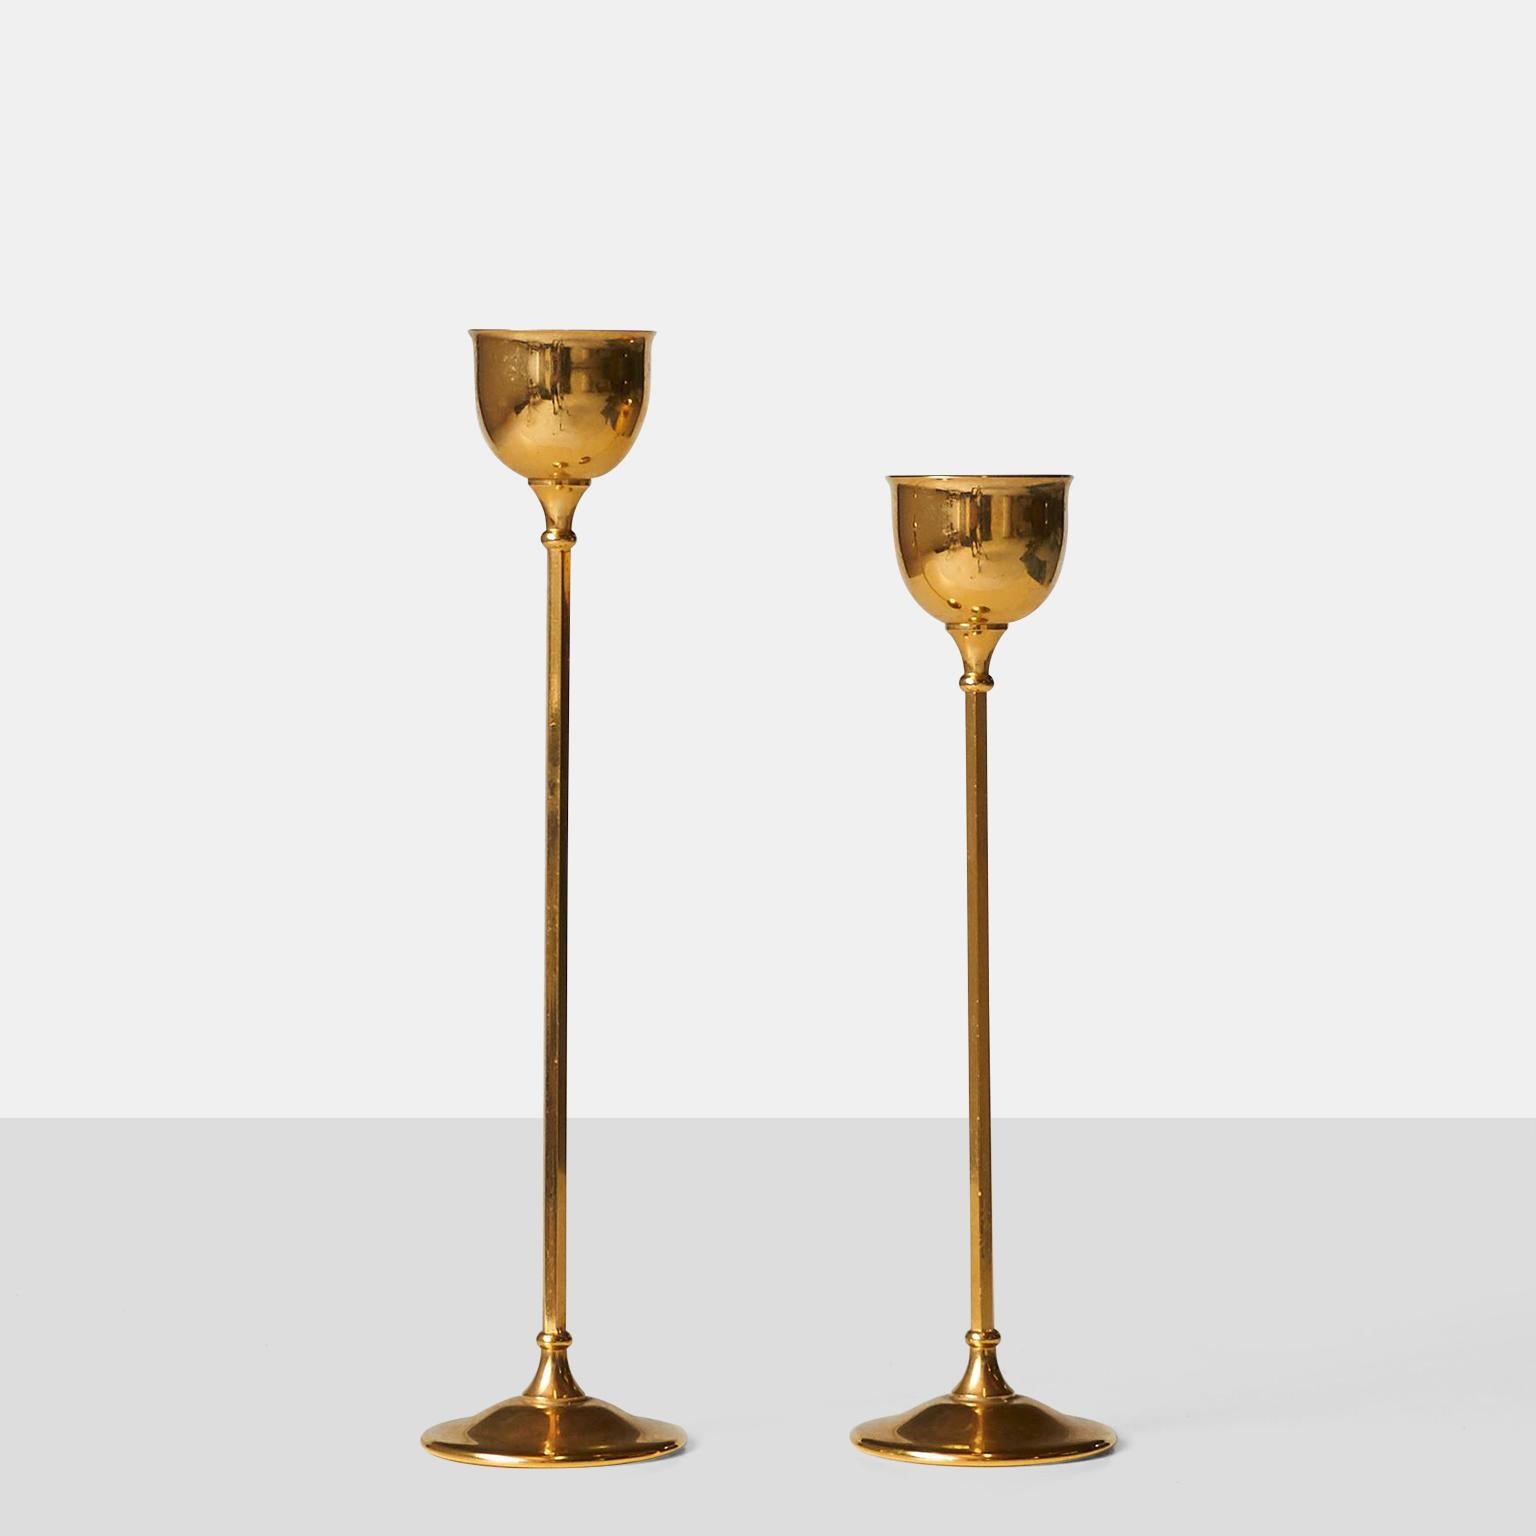 A pair of gold plated tulip candlesticks by Italian manufacturer William Adams.
Marked on the base.